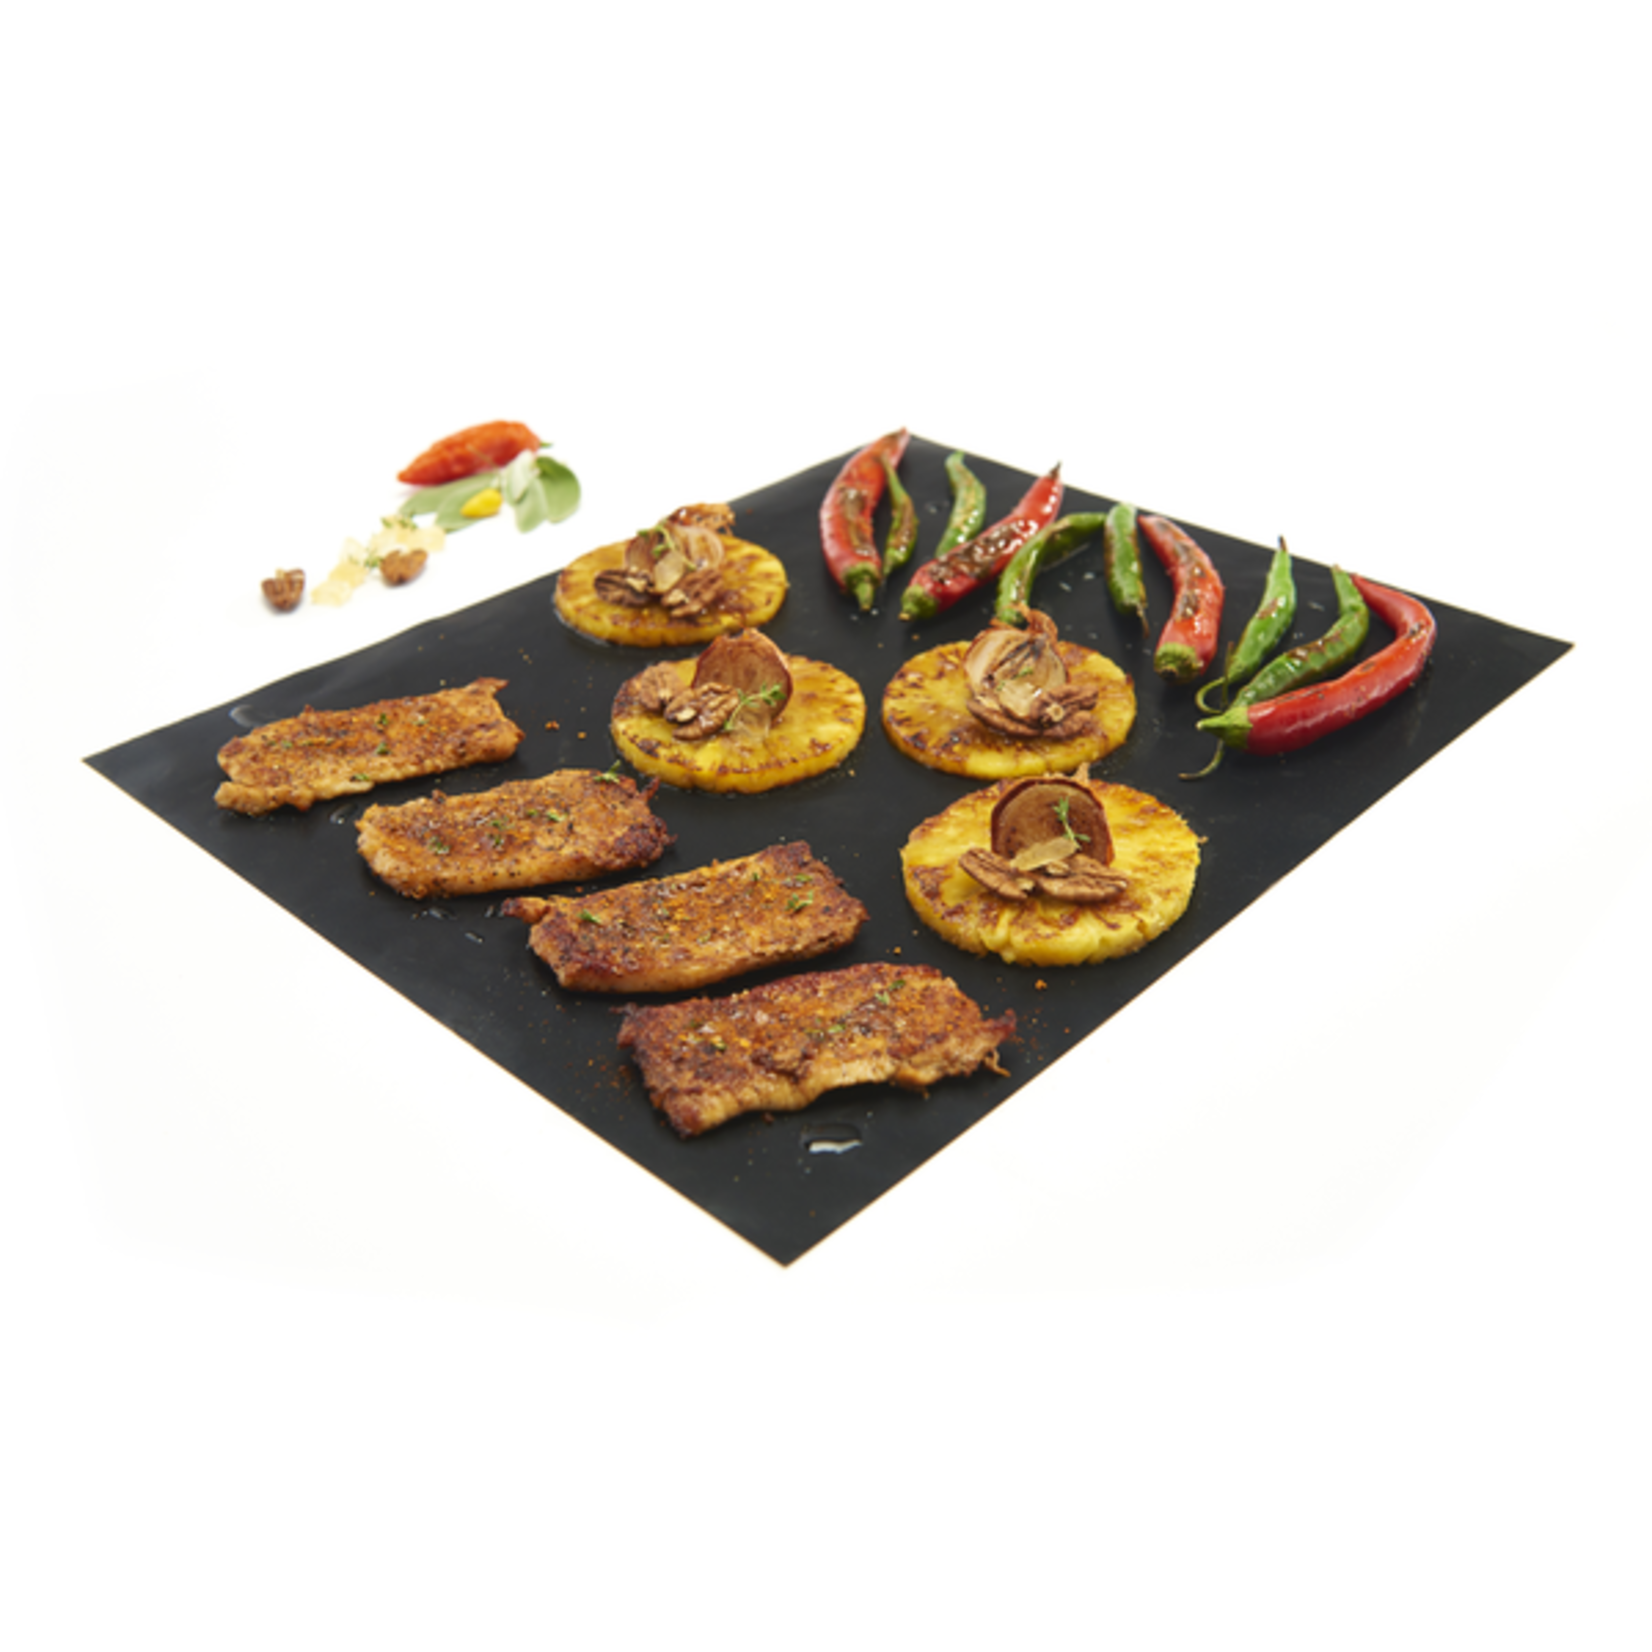 GrillPro Non-Stick Cooking Mats